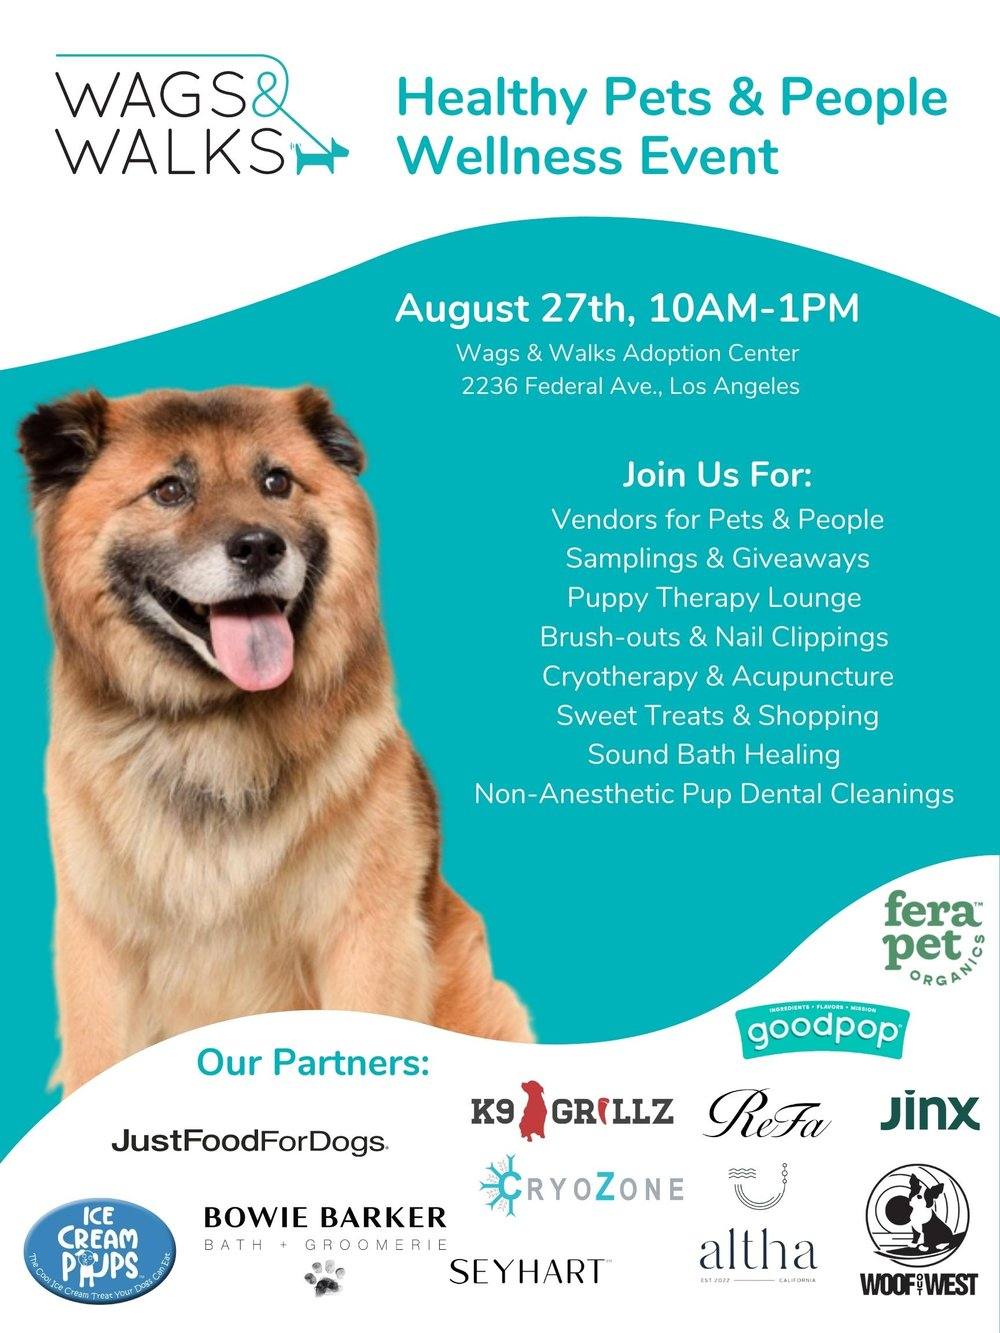 Join us Saturday, August 27th, 10am-1pm at the Wags & Walks Adoption Center (2236 Federal Ave, LA) for sound healing, brush-outs & nail clippings, acupuncture & cryotherapy, shopping, health & wellness vendors for pups & people, samplings & giveaways, a puppy therapy lounge & veterinarian supervised non-anesthetic dental cleanings.